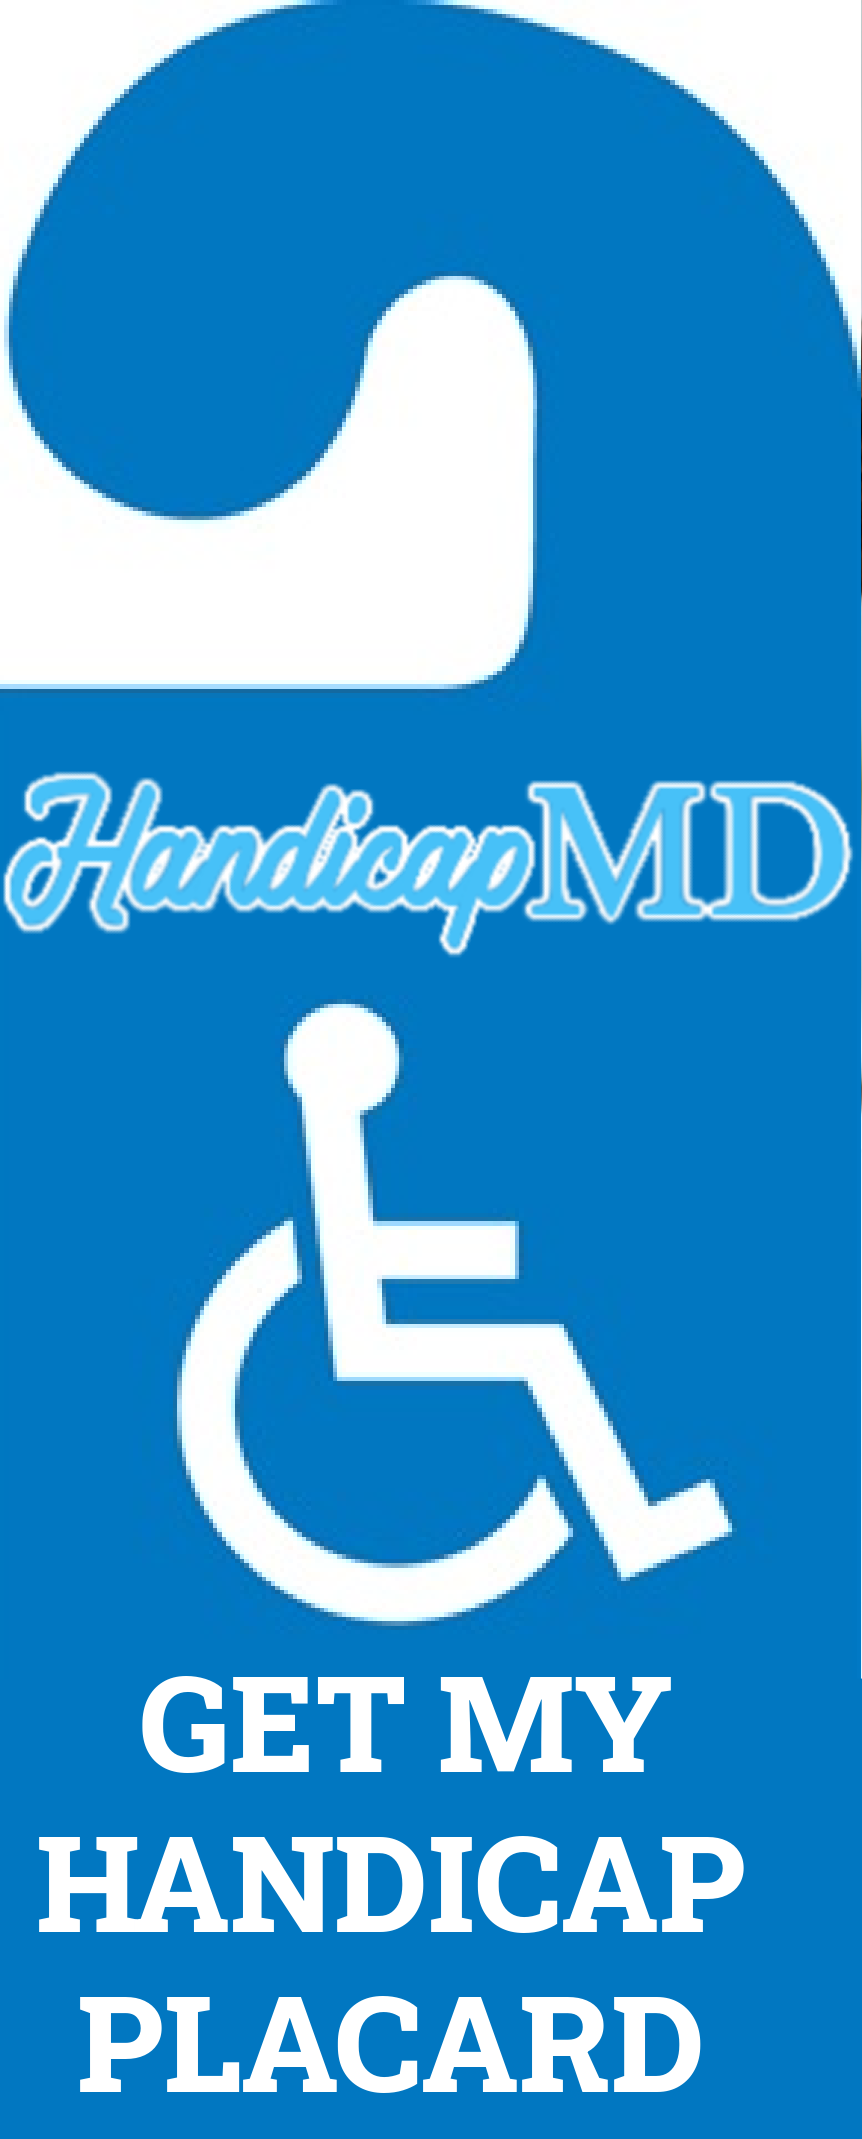  Handicap Placard Violations and Penalties in Missouri: What You Need to Know